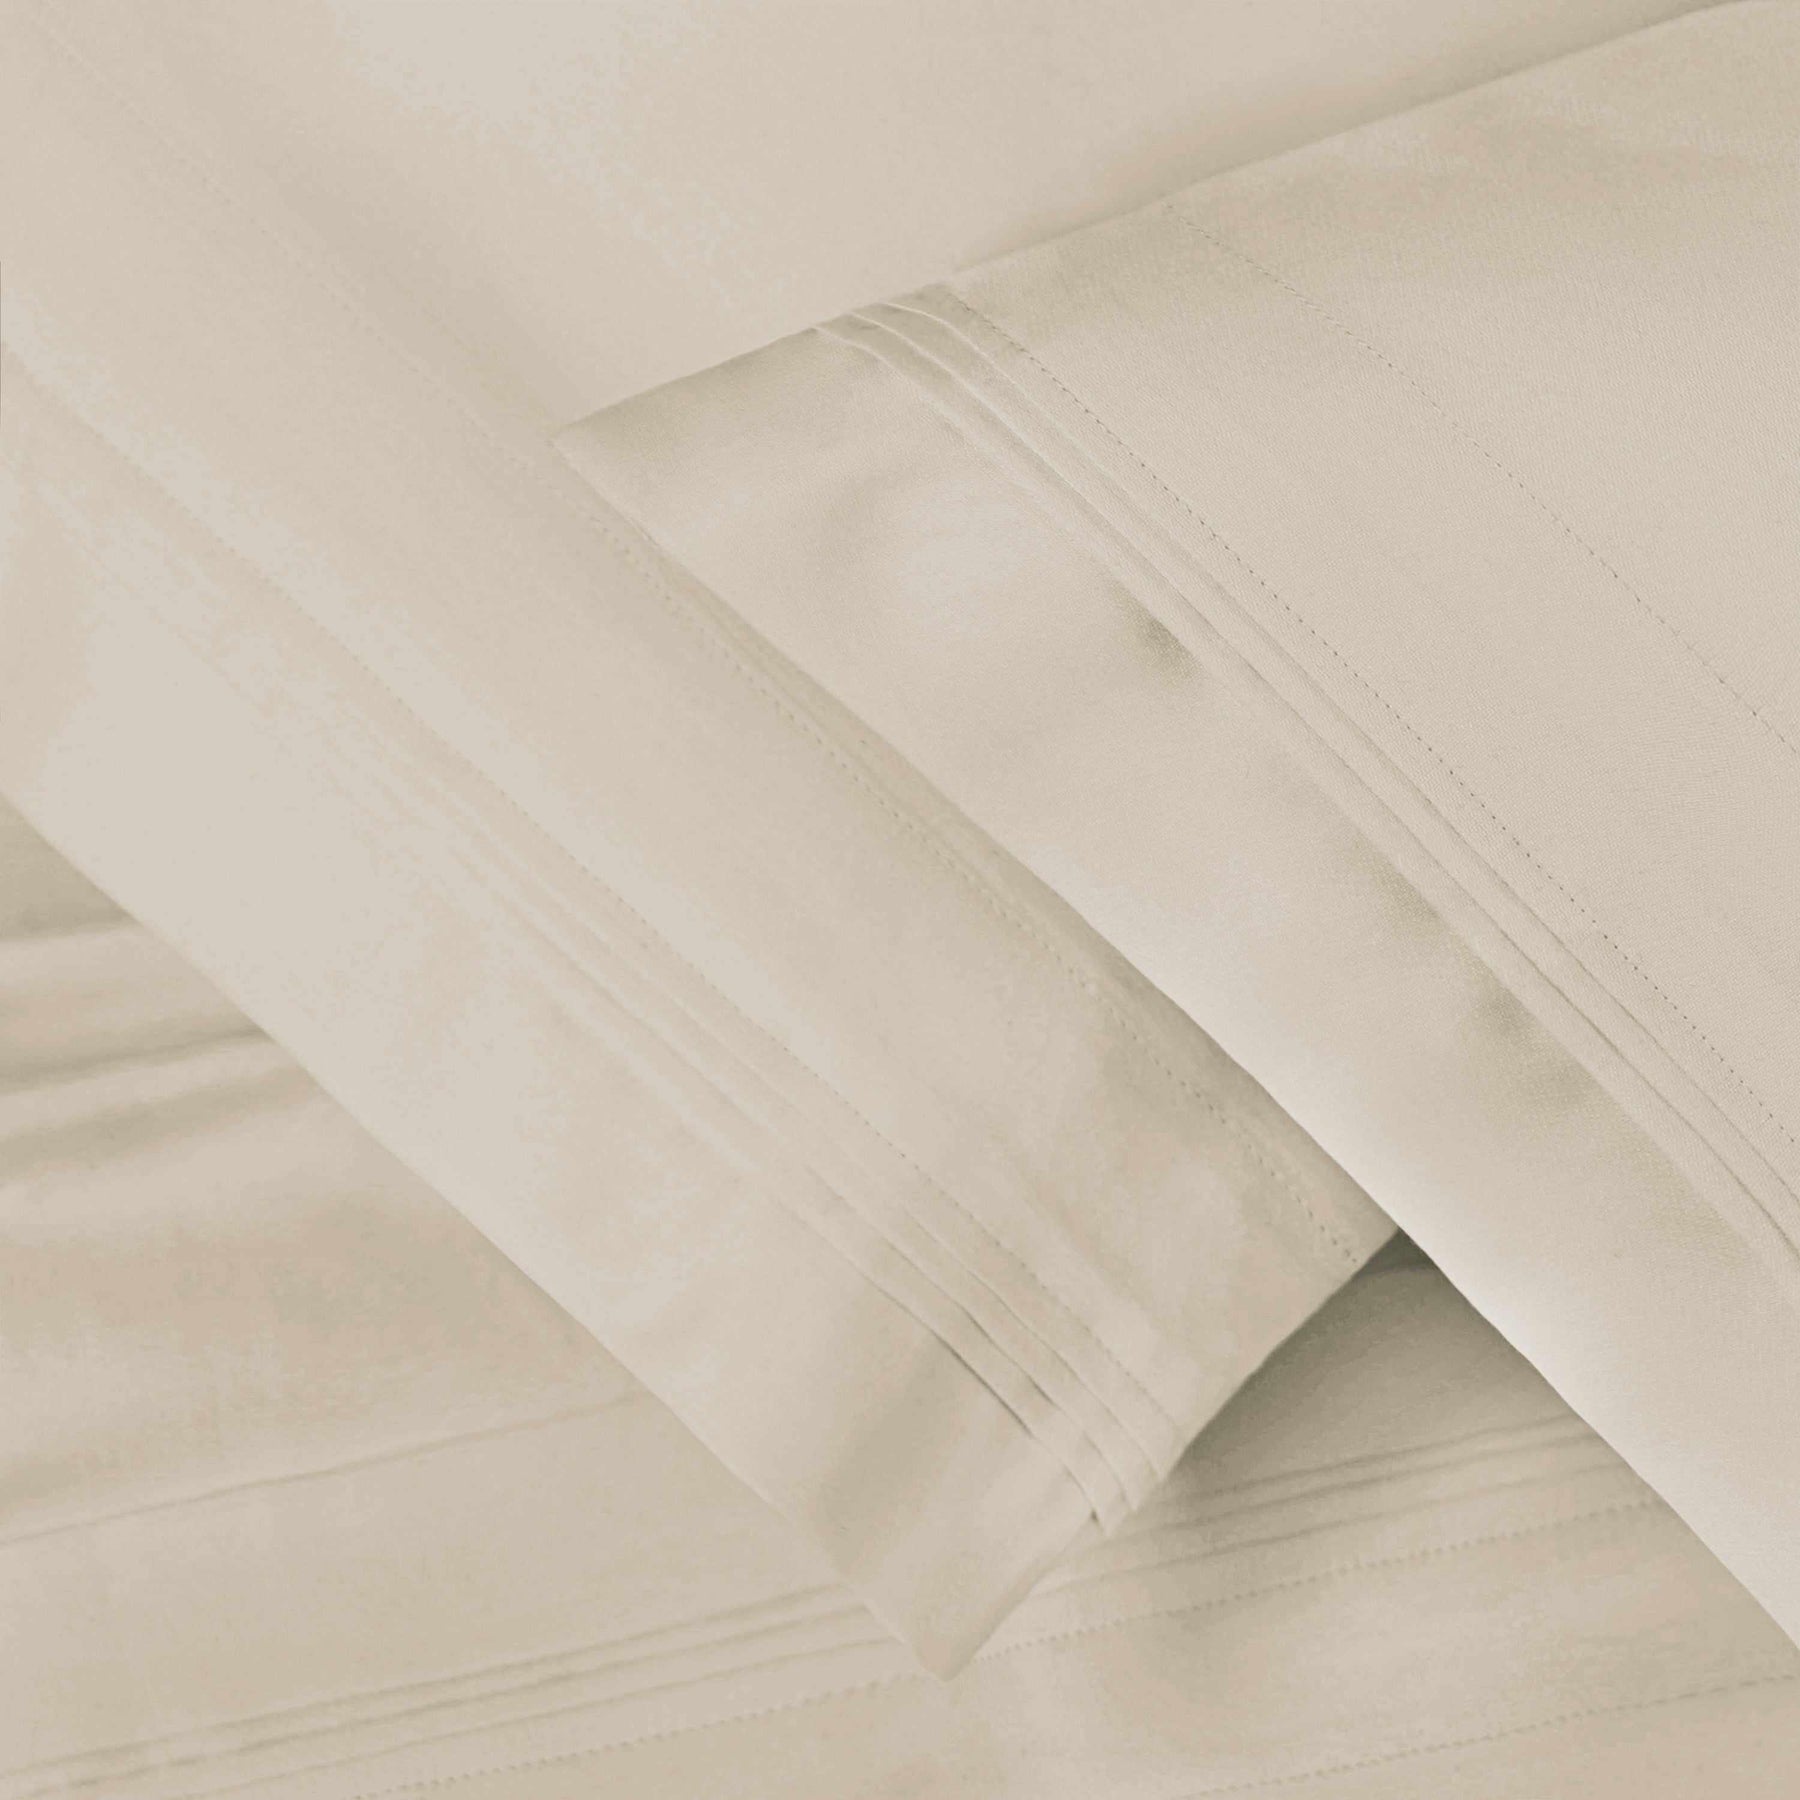 Solid 1500 Thread Count Egyptian Cotton 2-Piece Pillowcase Set - Ivory